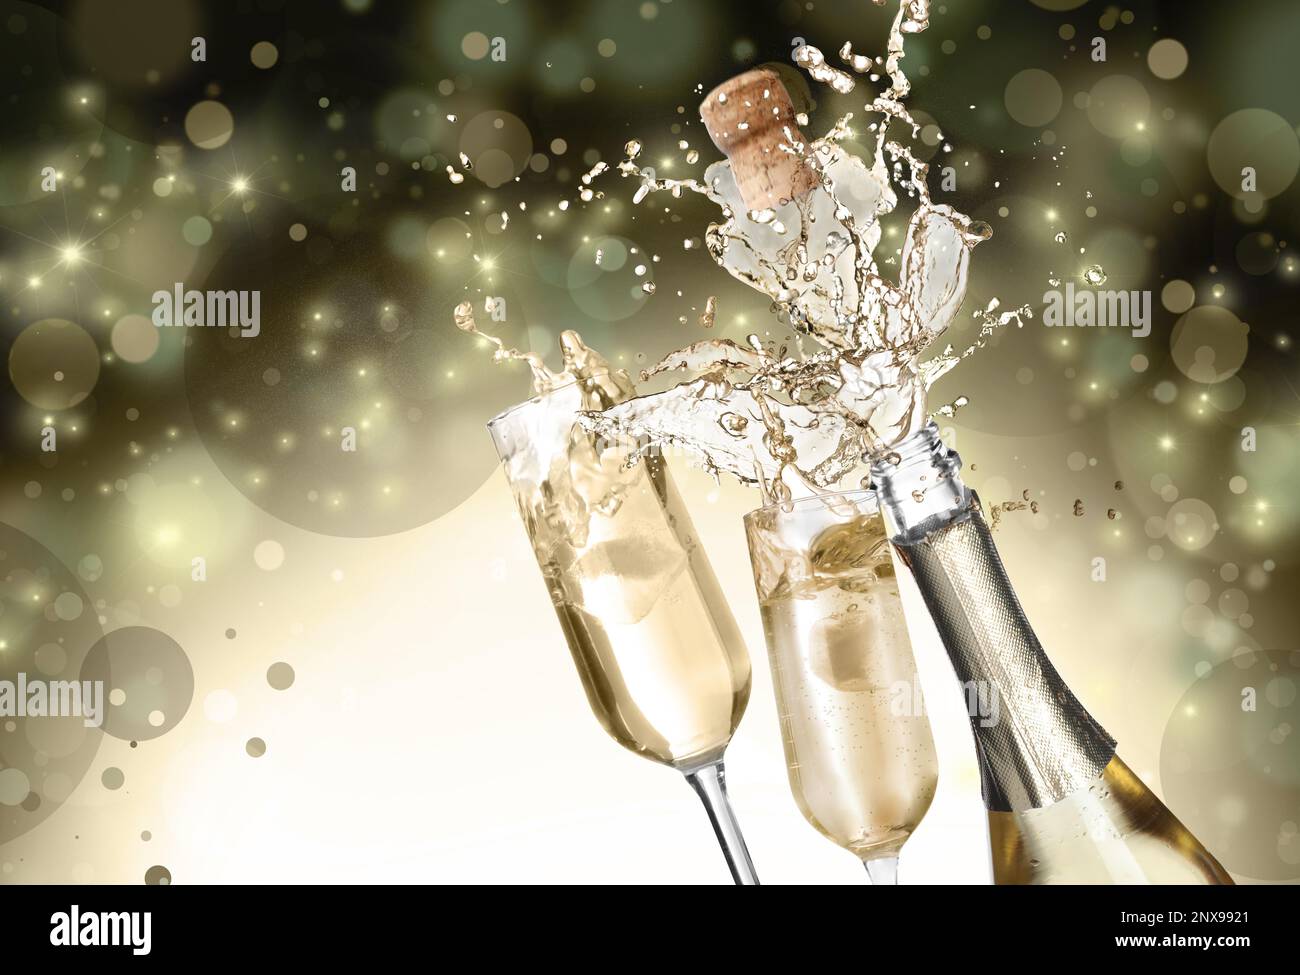 Sparkling wine splashing out of bottle and glasses on color background, bokeh effect Stock Photo